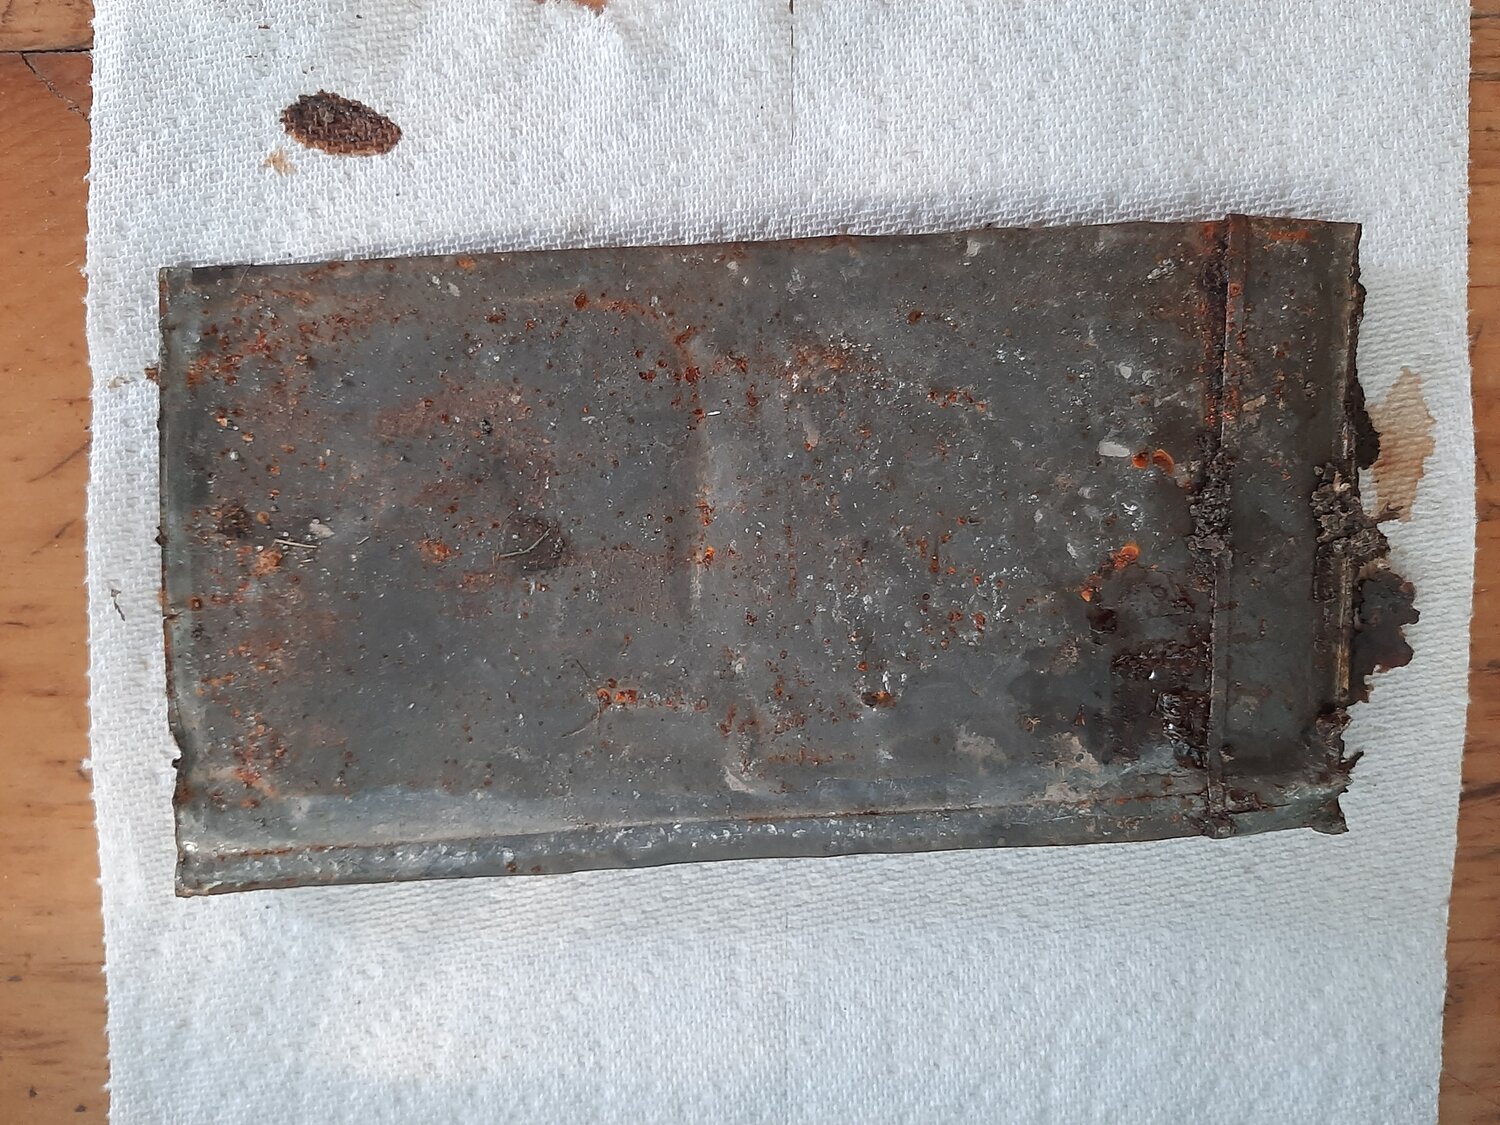 The flattened metal case, which housed the 200-year-old charter of the Utica Knights Templar Commander, has been found, although the charter was destroyed by the elements. The original documents will be replaced by a high quality replica, girded by the original charter’s ribbon and lead Templar seal which survived, according to organization officials.